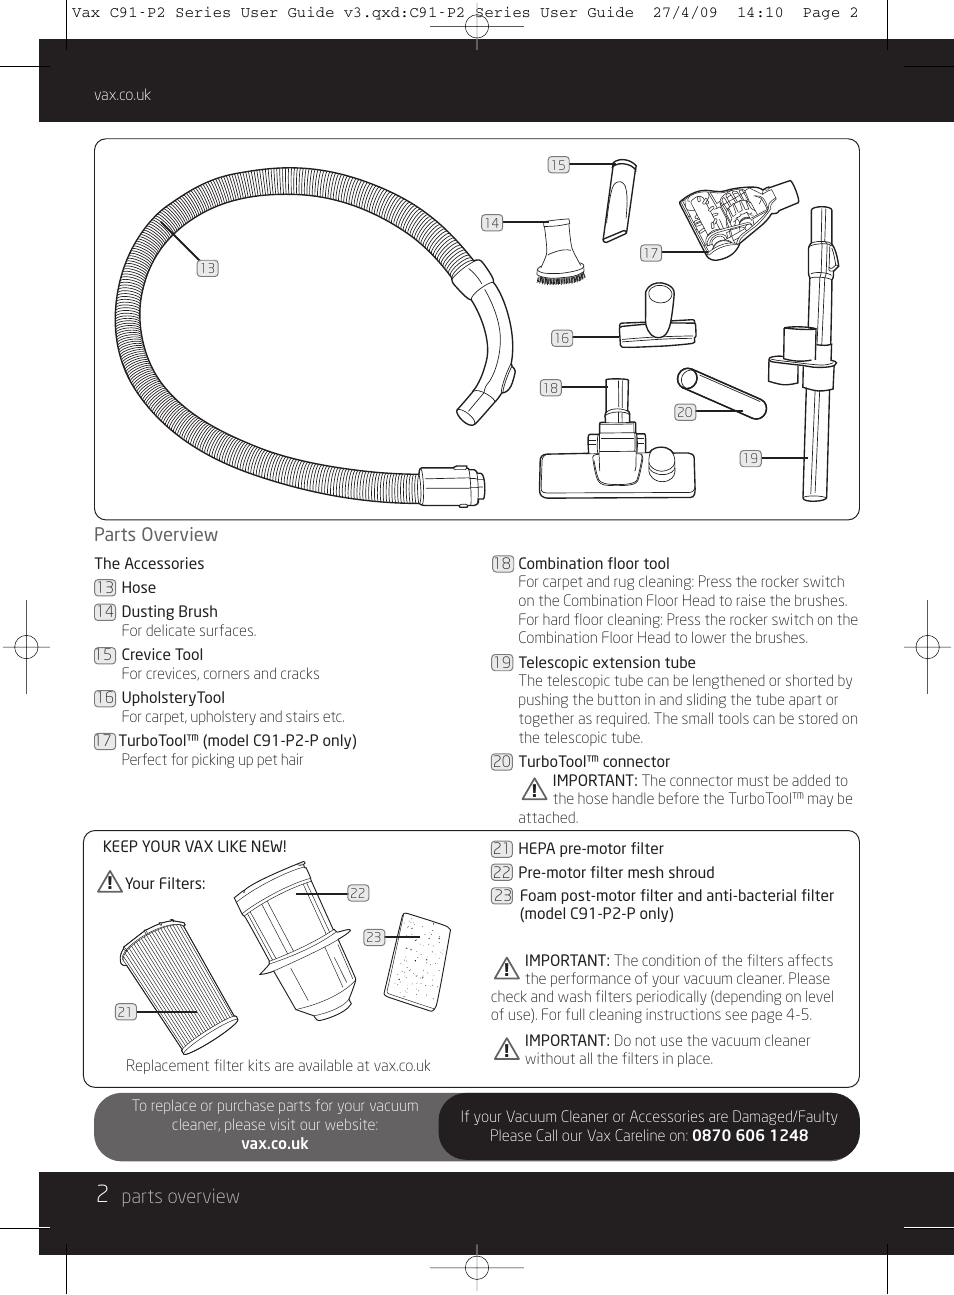 Parts overview | Vax C91-P2 User Manual | Page 2 / 12